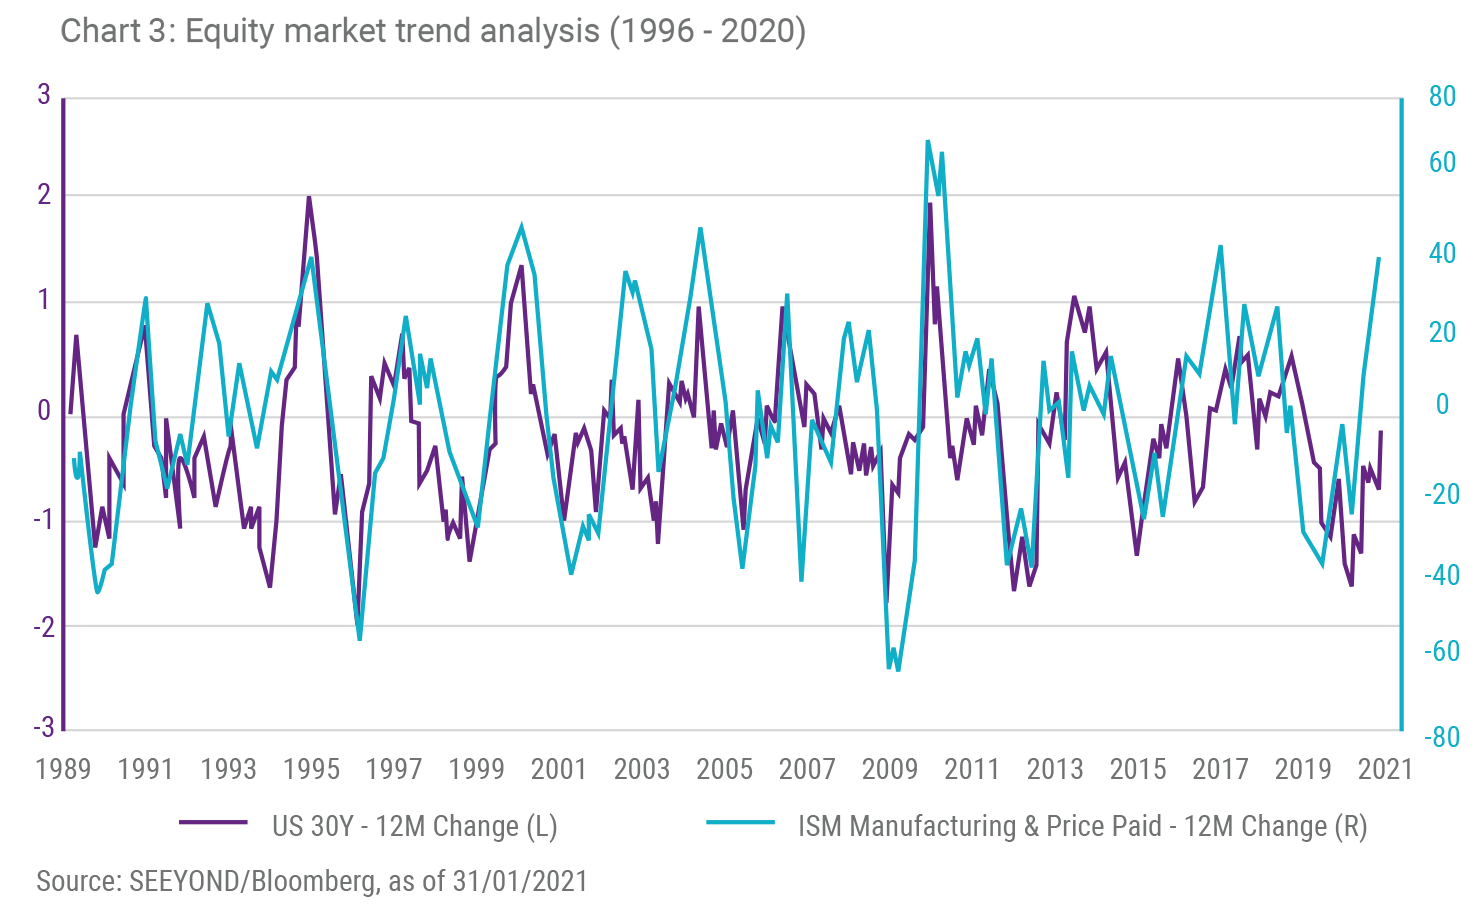 Chart 3: Equity market trend analysis (1996 - 2020)